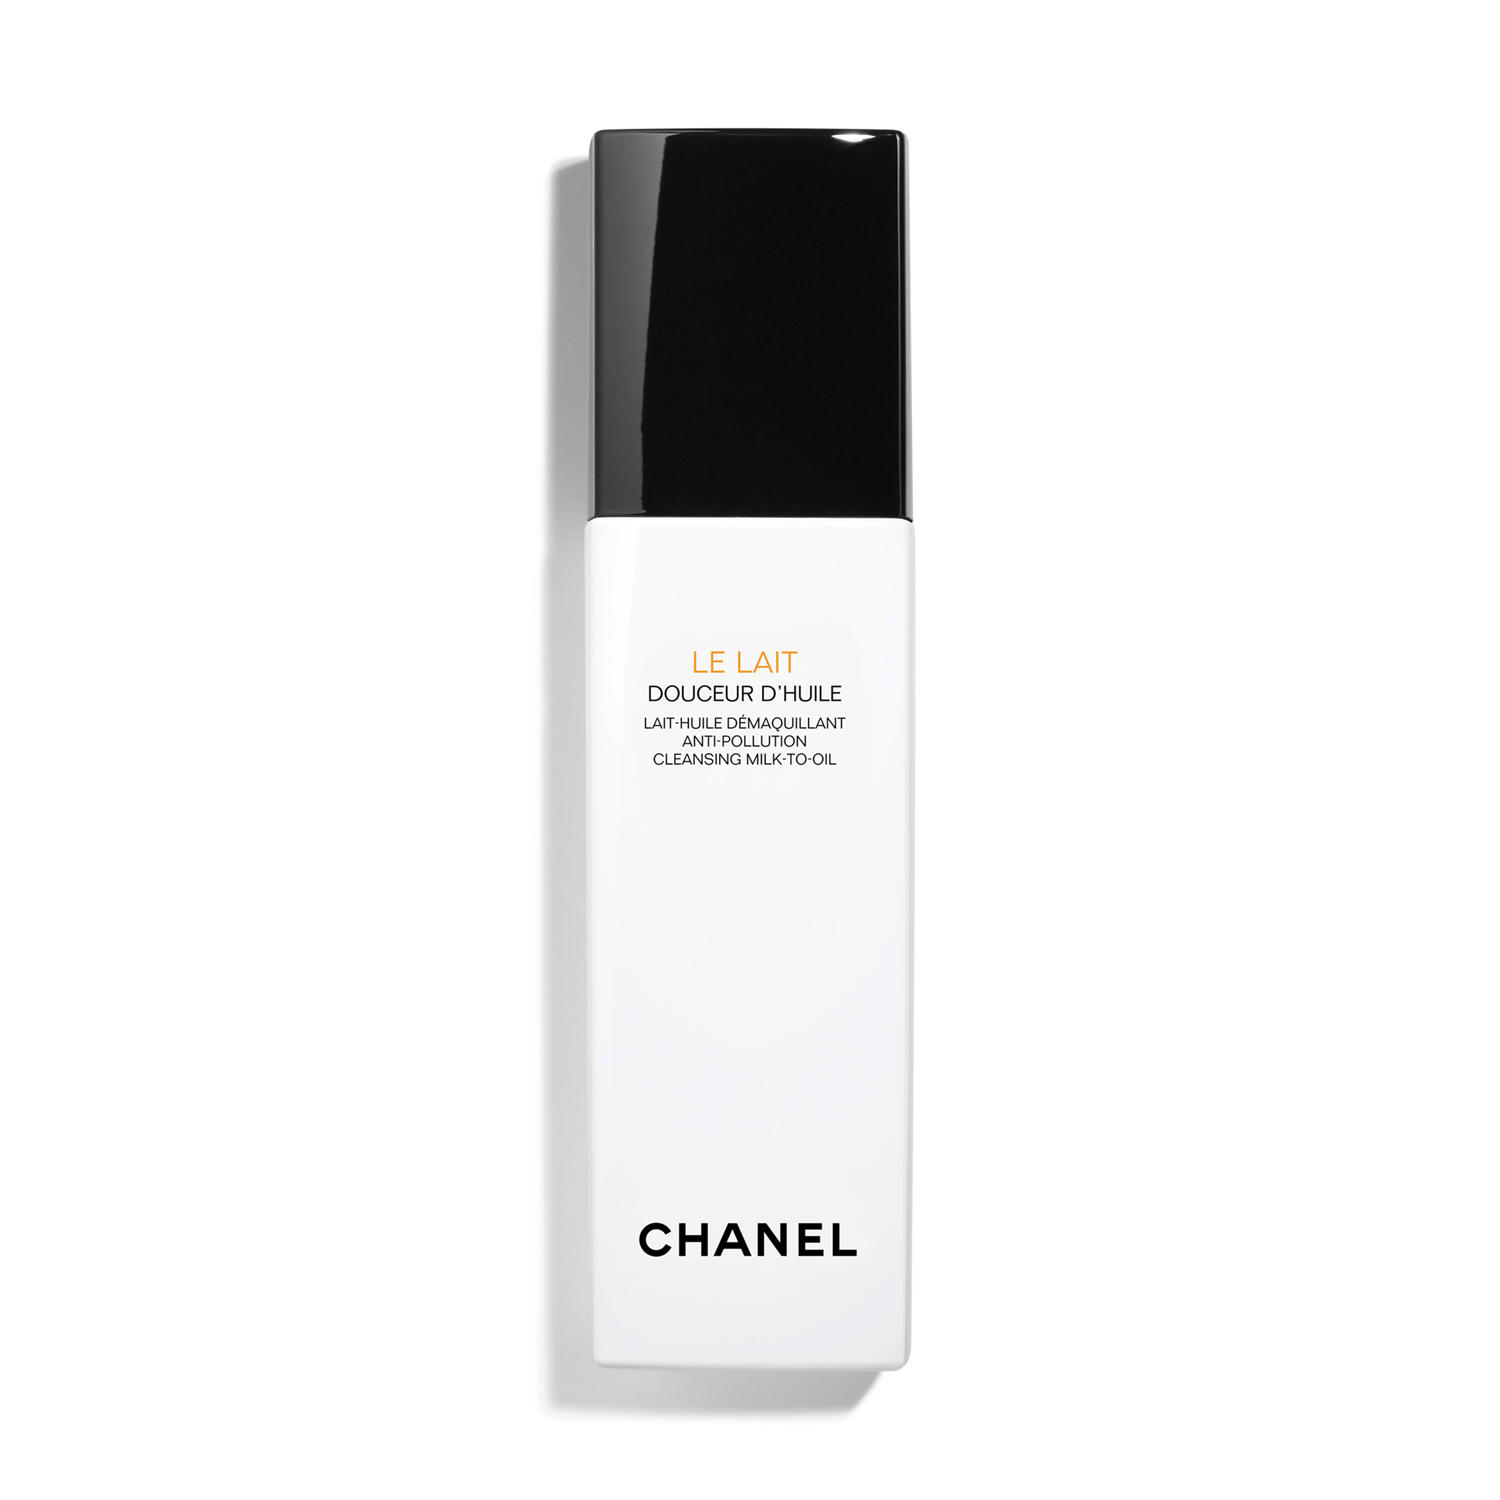 Chanel Le Lait Anti-Pollution Cleansing Milk-To-Oil